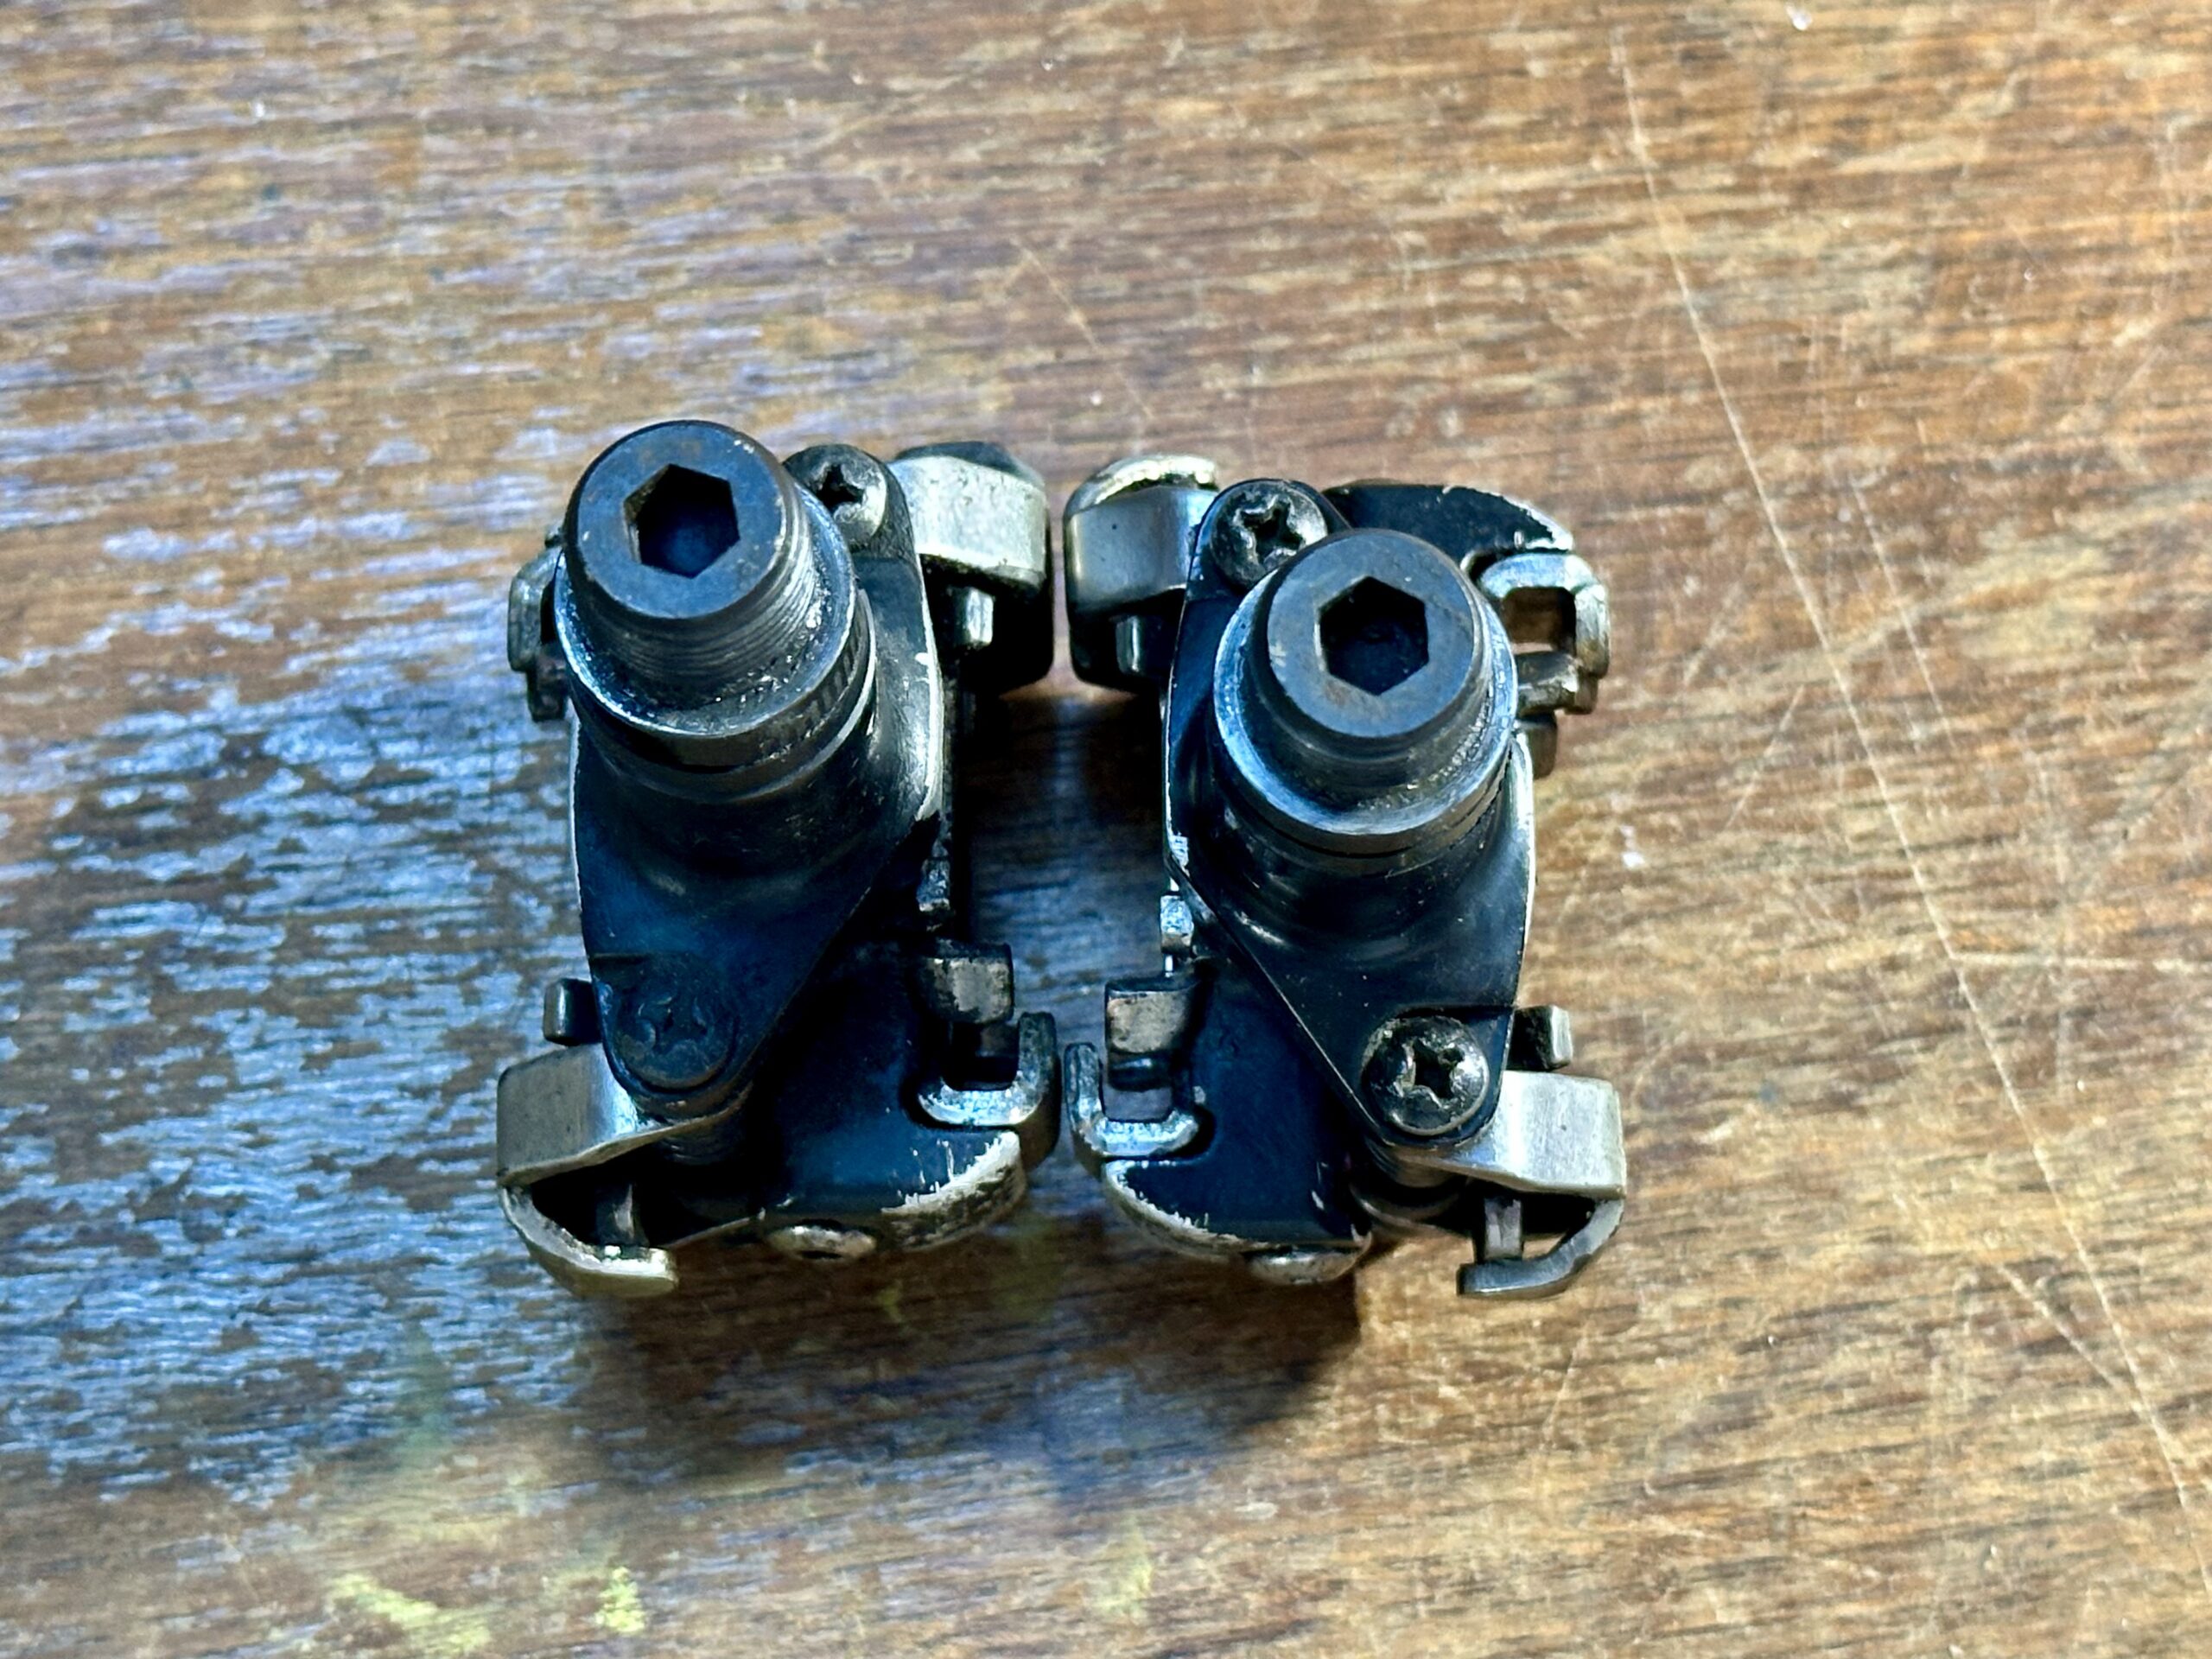 Shimano PD-M505 SPD Pedals